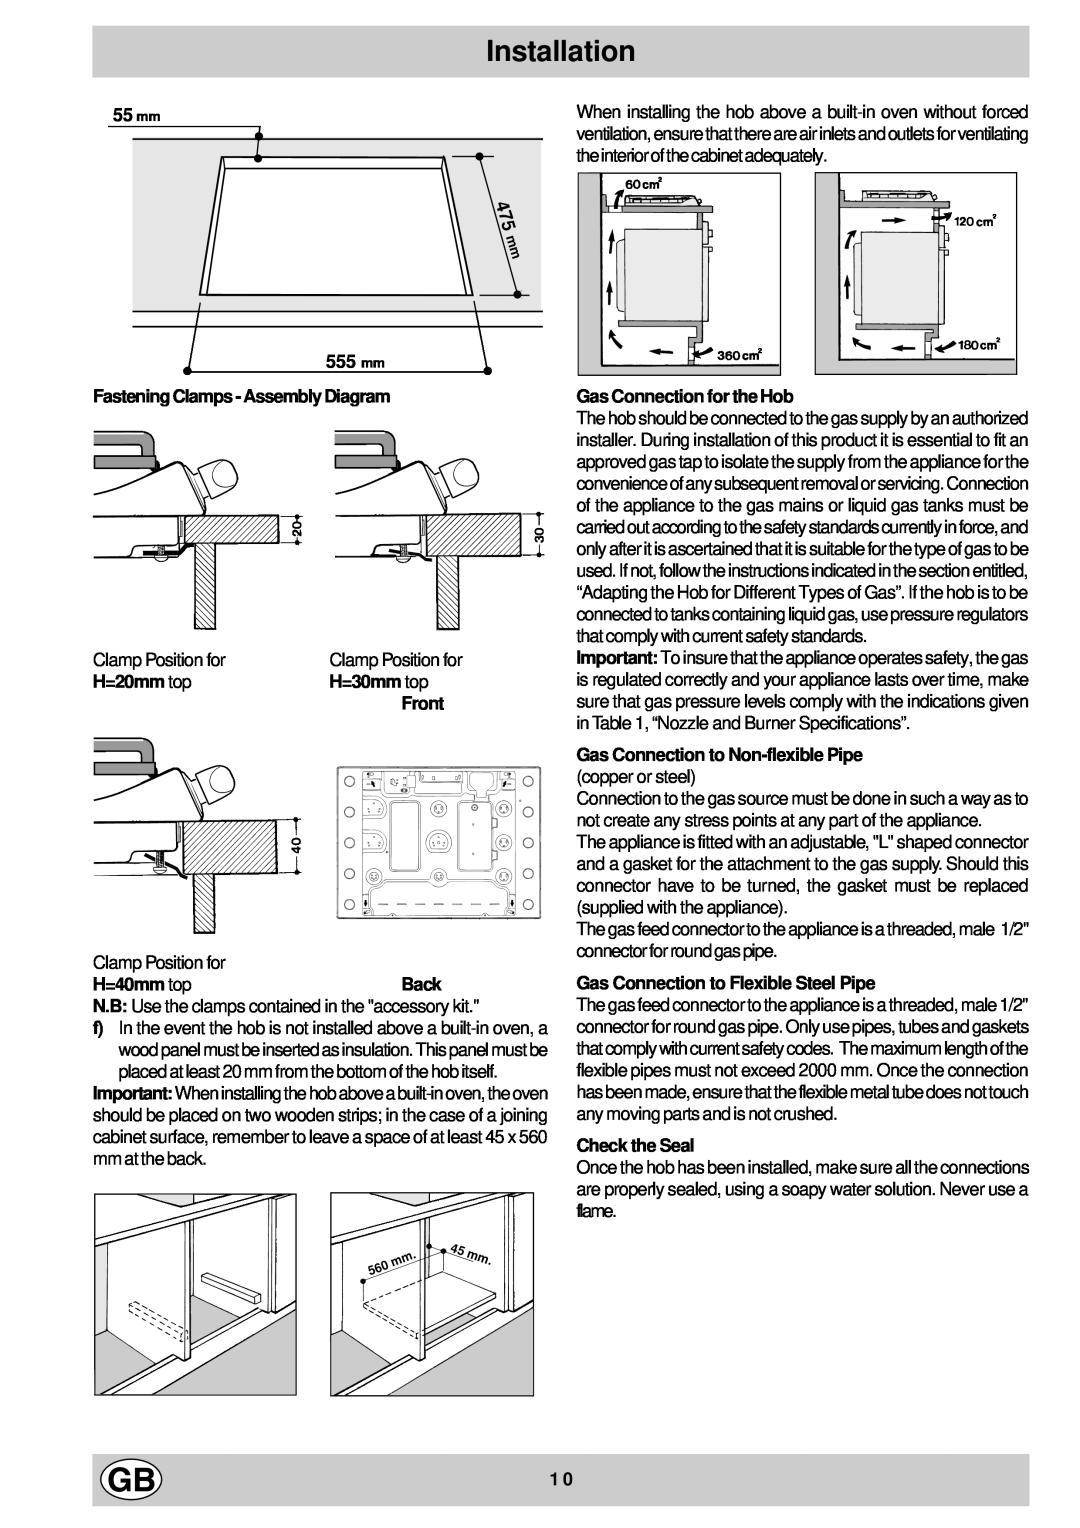 Hotpoint G750, G760 Installation, mm Fastening Clamps - Assembly Diagram, H=20mm top, H=30mm top, Front, Check the Seal 